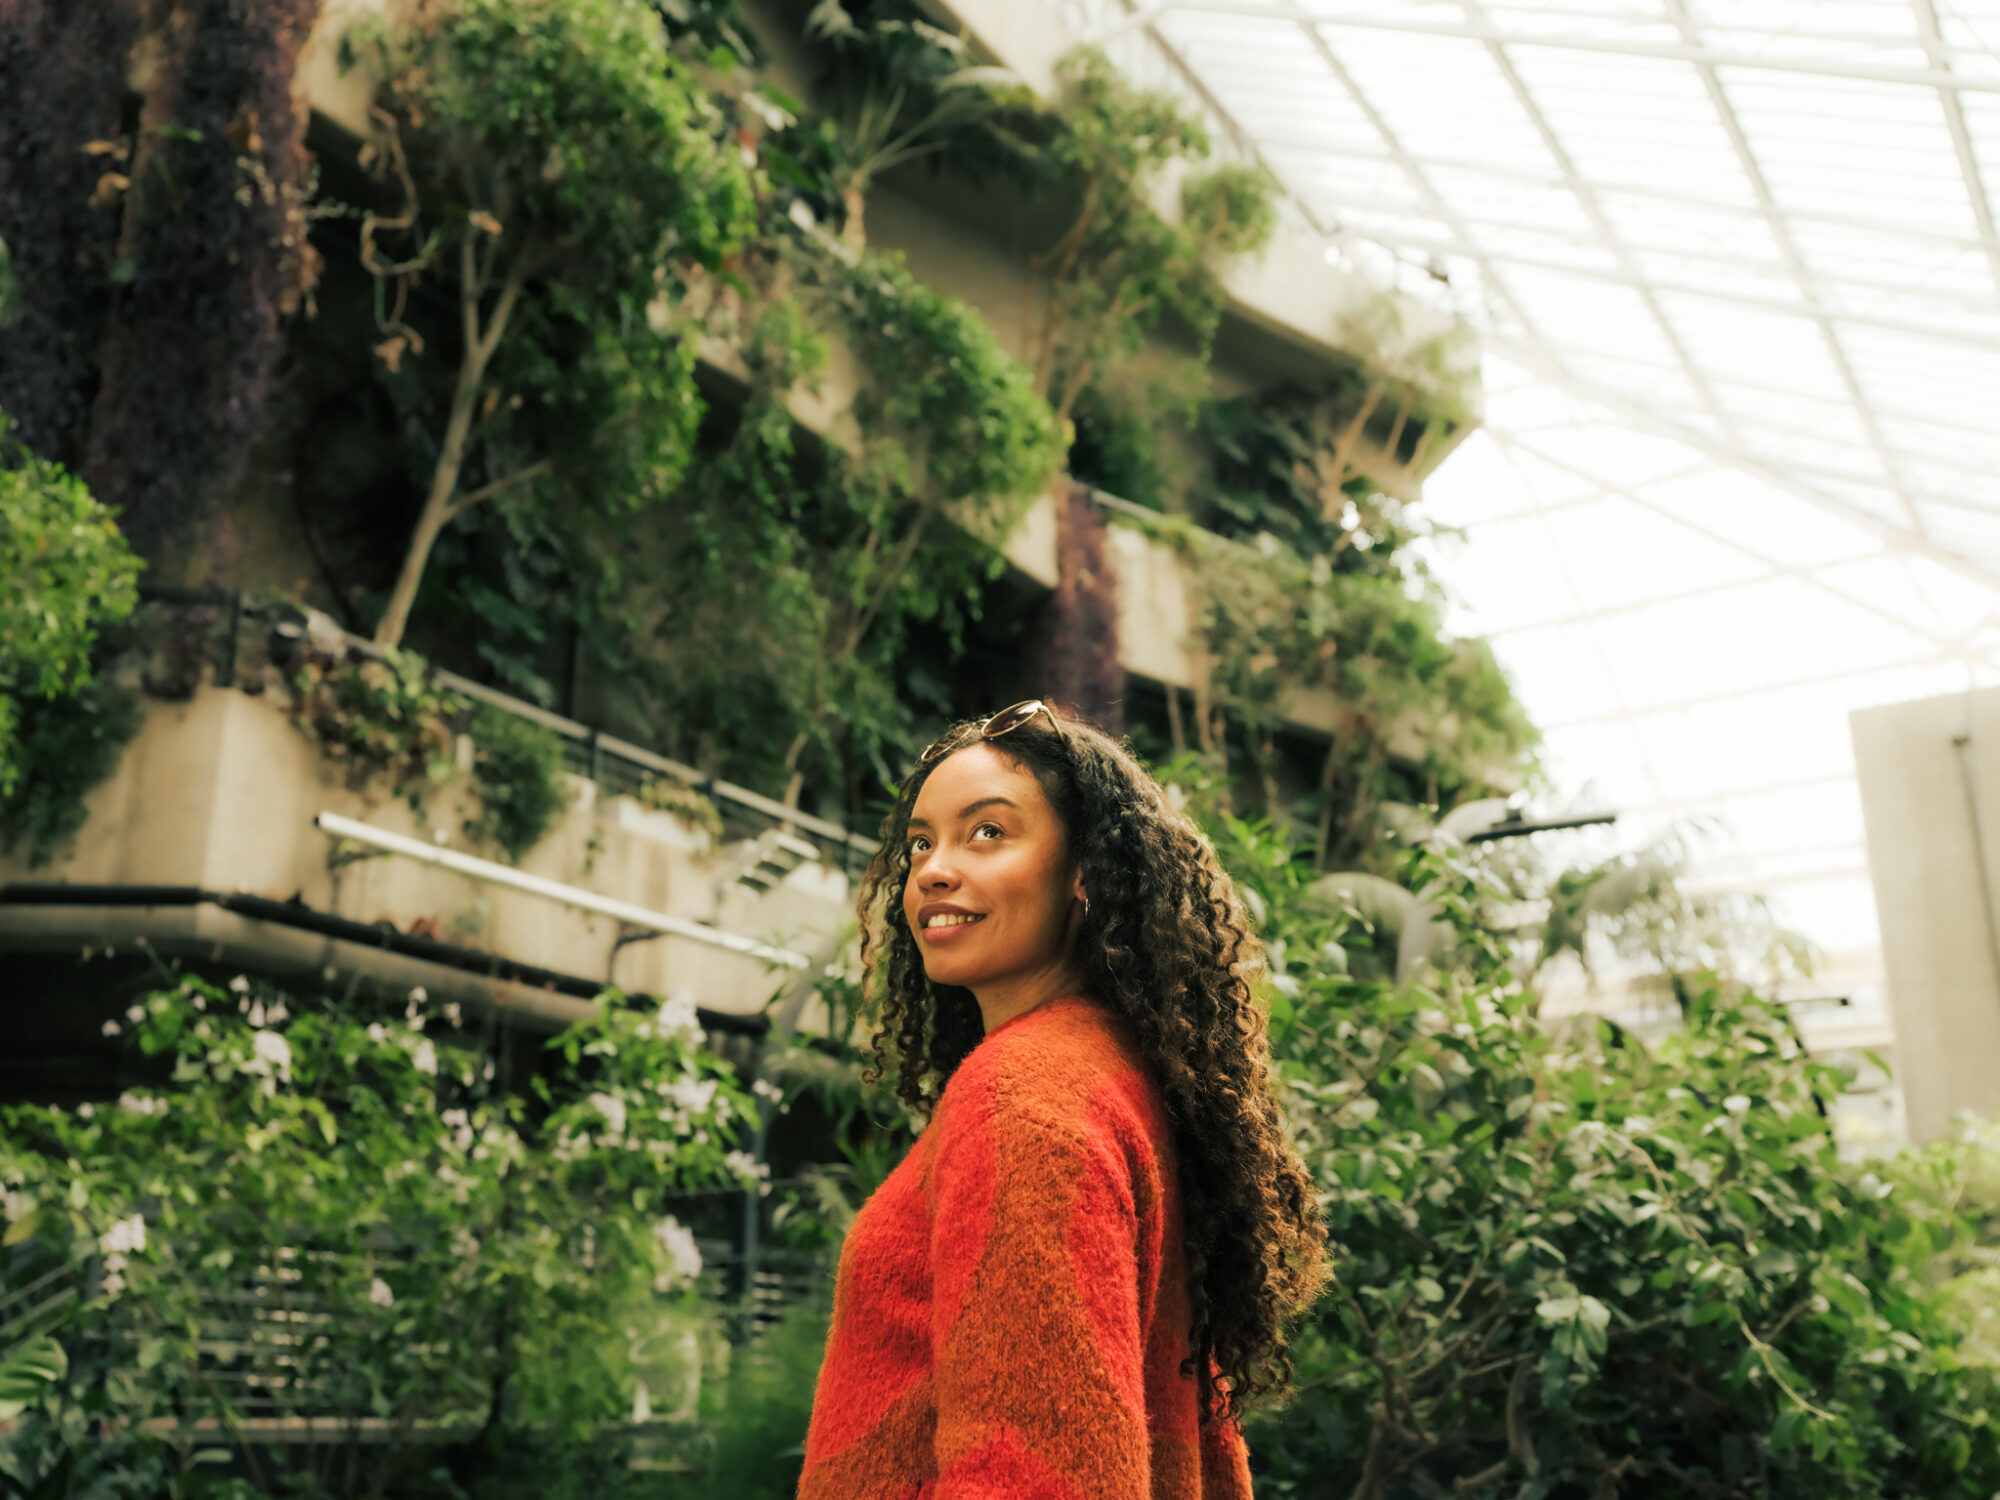 Yoga, Spas and Green Spaces in the City of London - woman in the Barbican Conservatory - tropical plants in background growing over concrete balconies